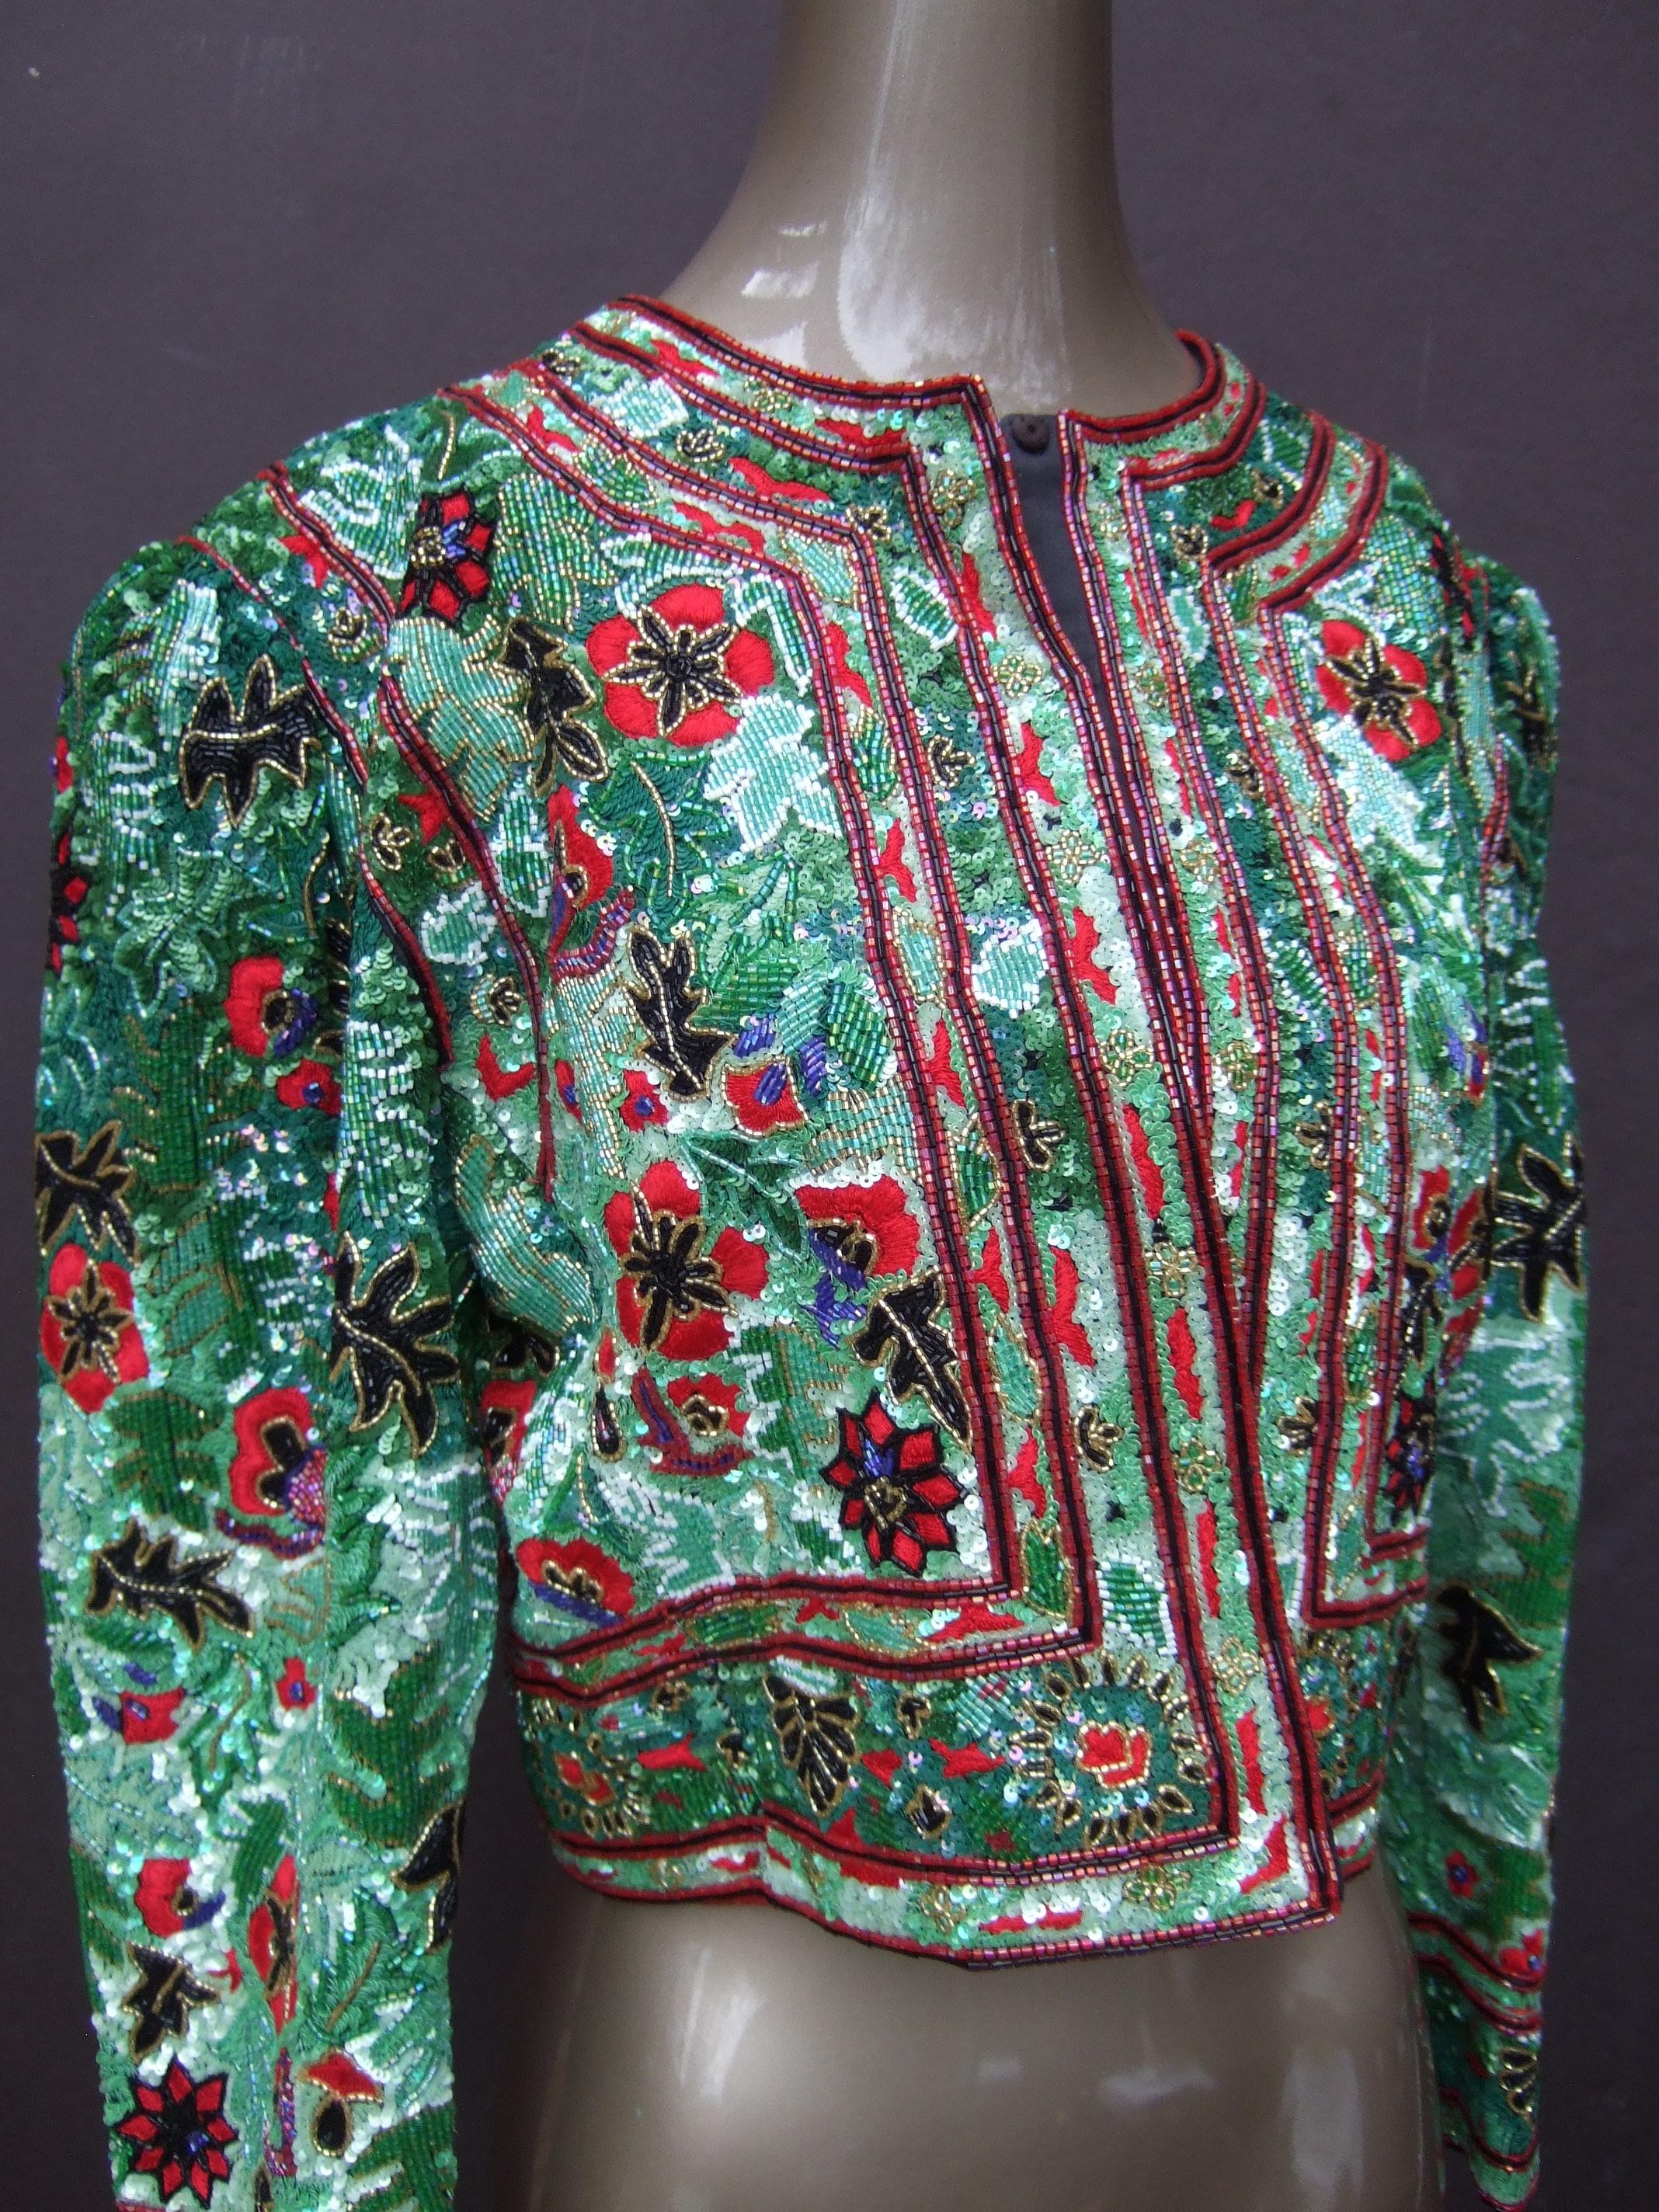 Exquisite Elaborate Glass Floral Beaded Embroidered Bolero Jacket c 1980s For Sale 8